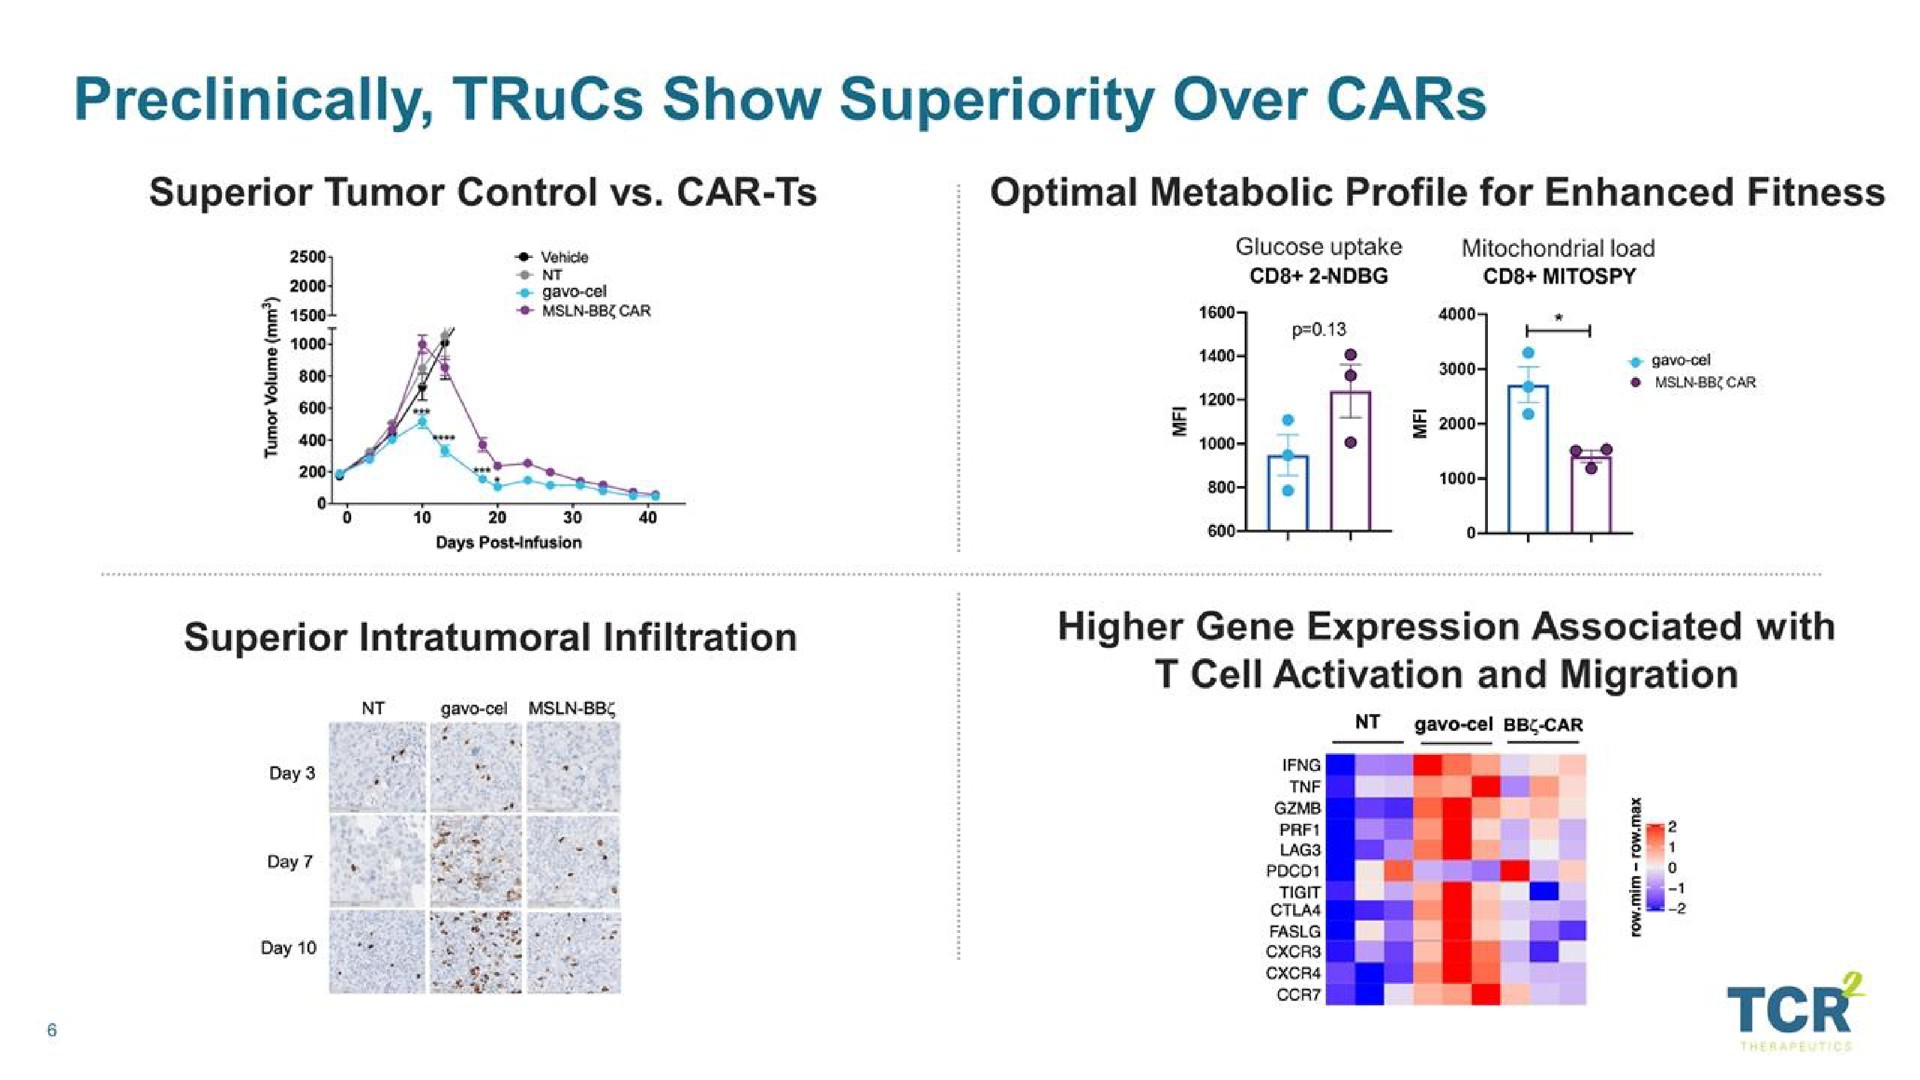 show superiority over cars | TCR2 Therapeutics